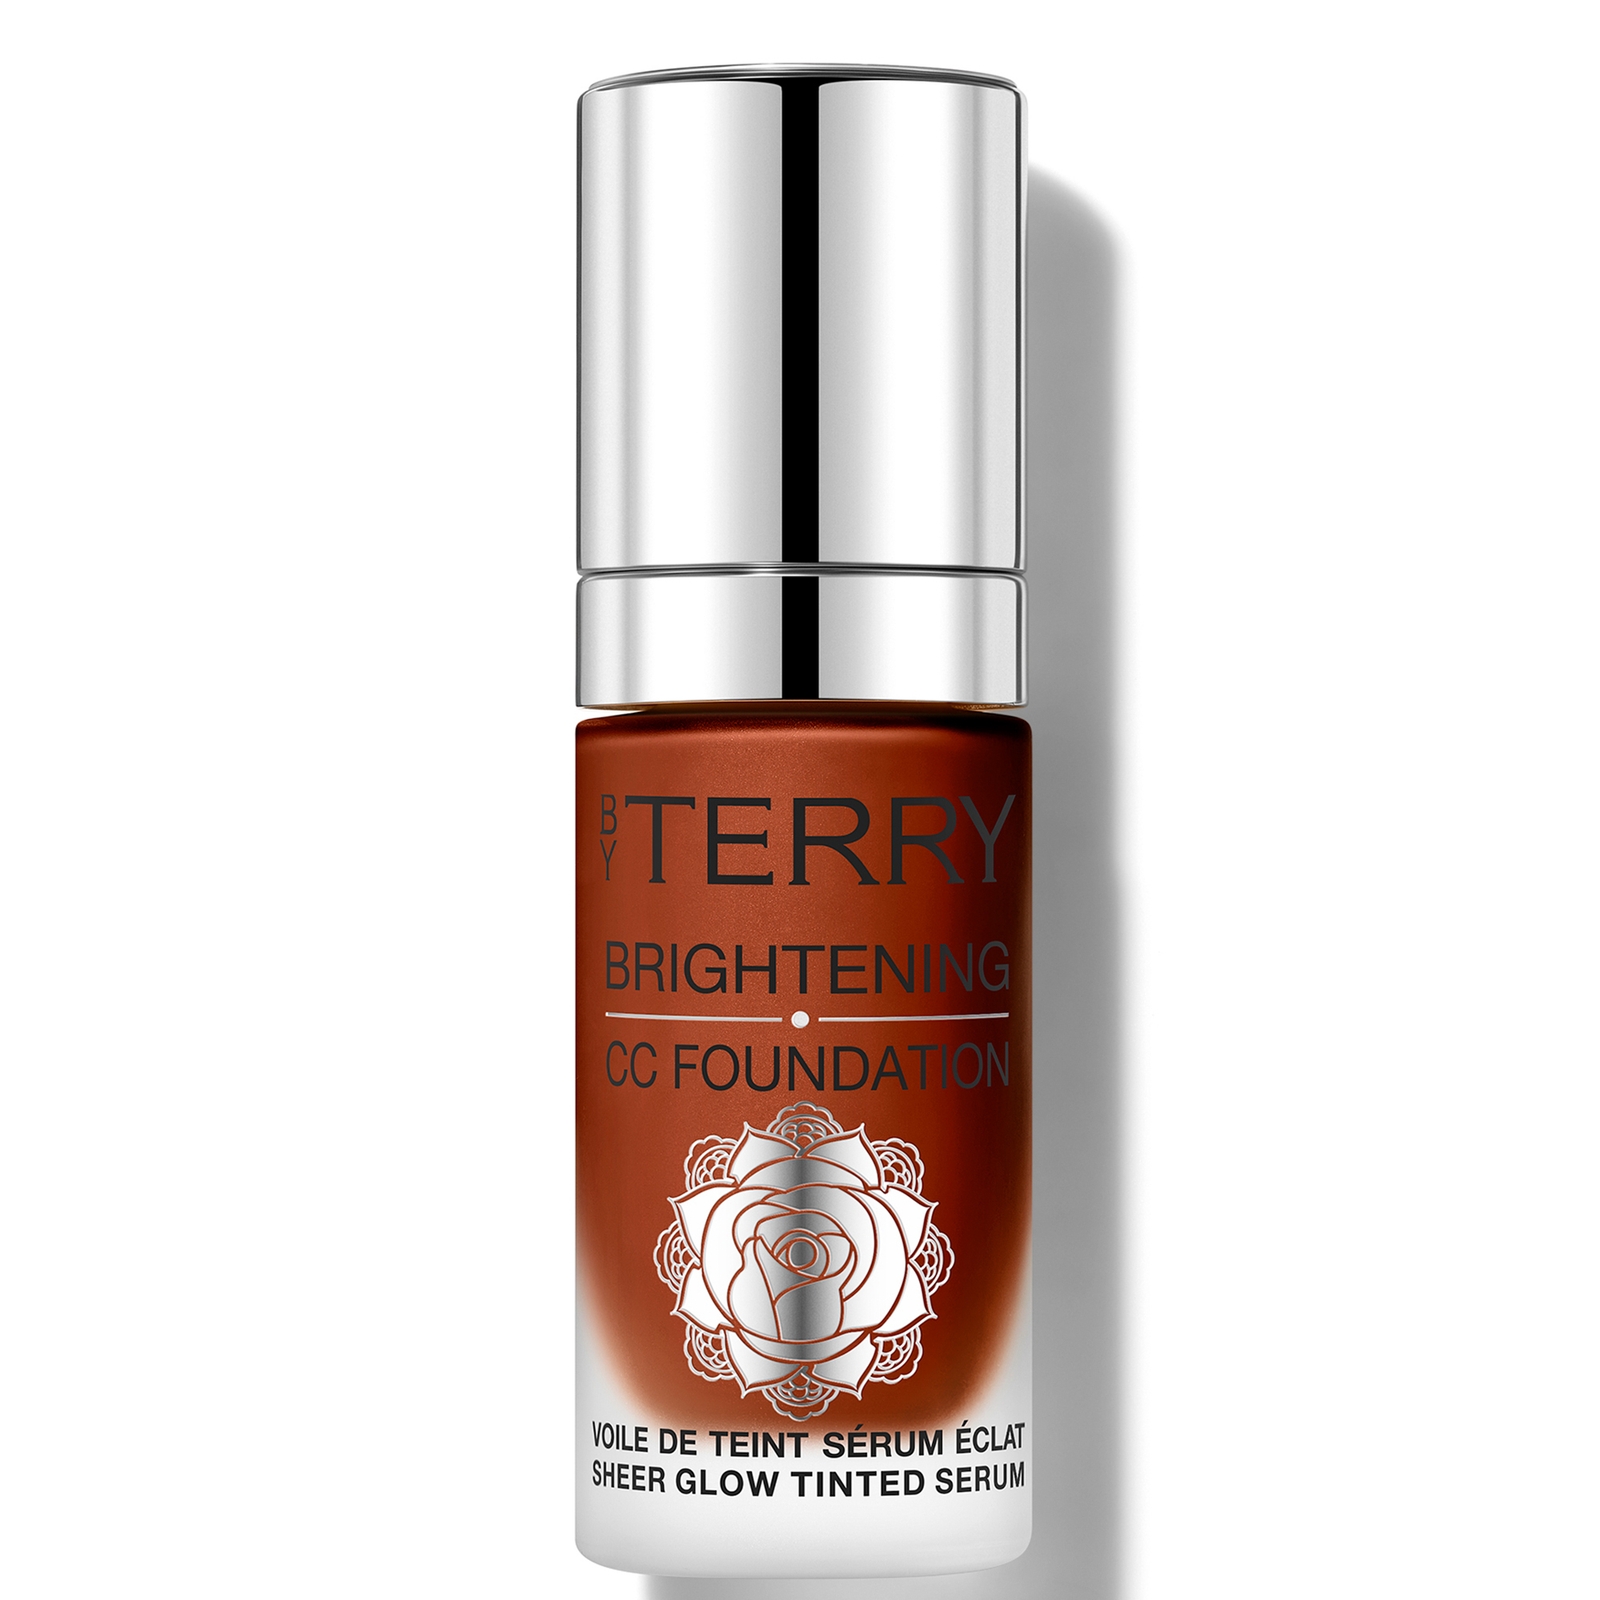 By Terry Brightening Cc Foundation 30ml (various Shades) - 8c In Neutral